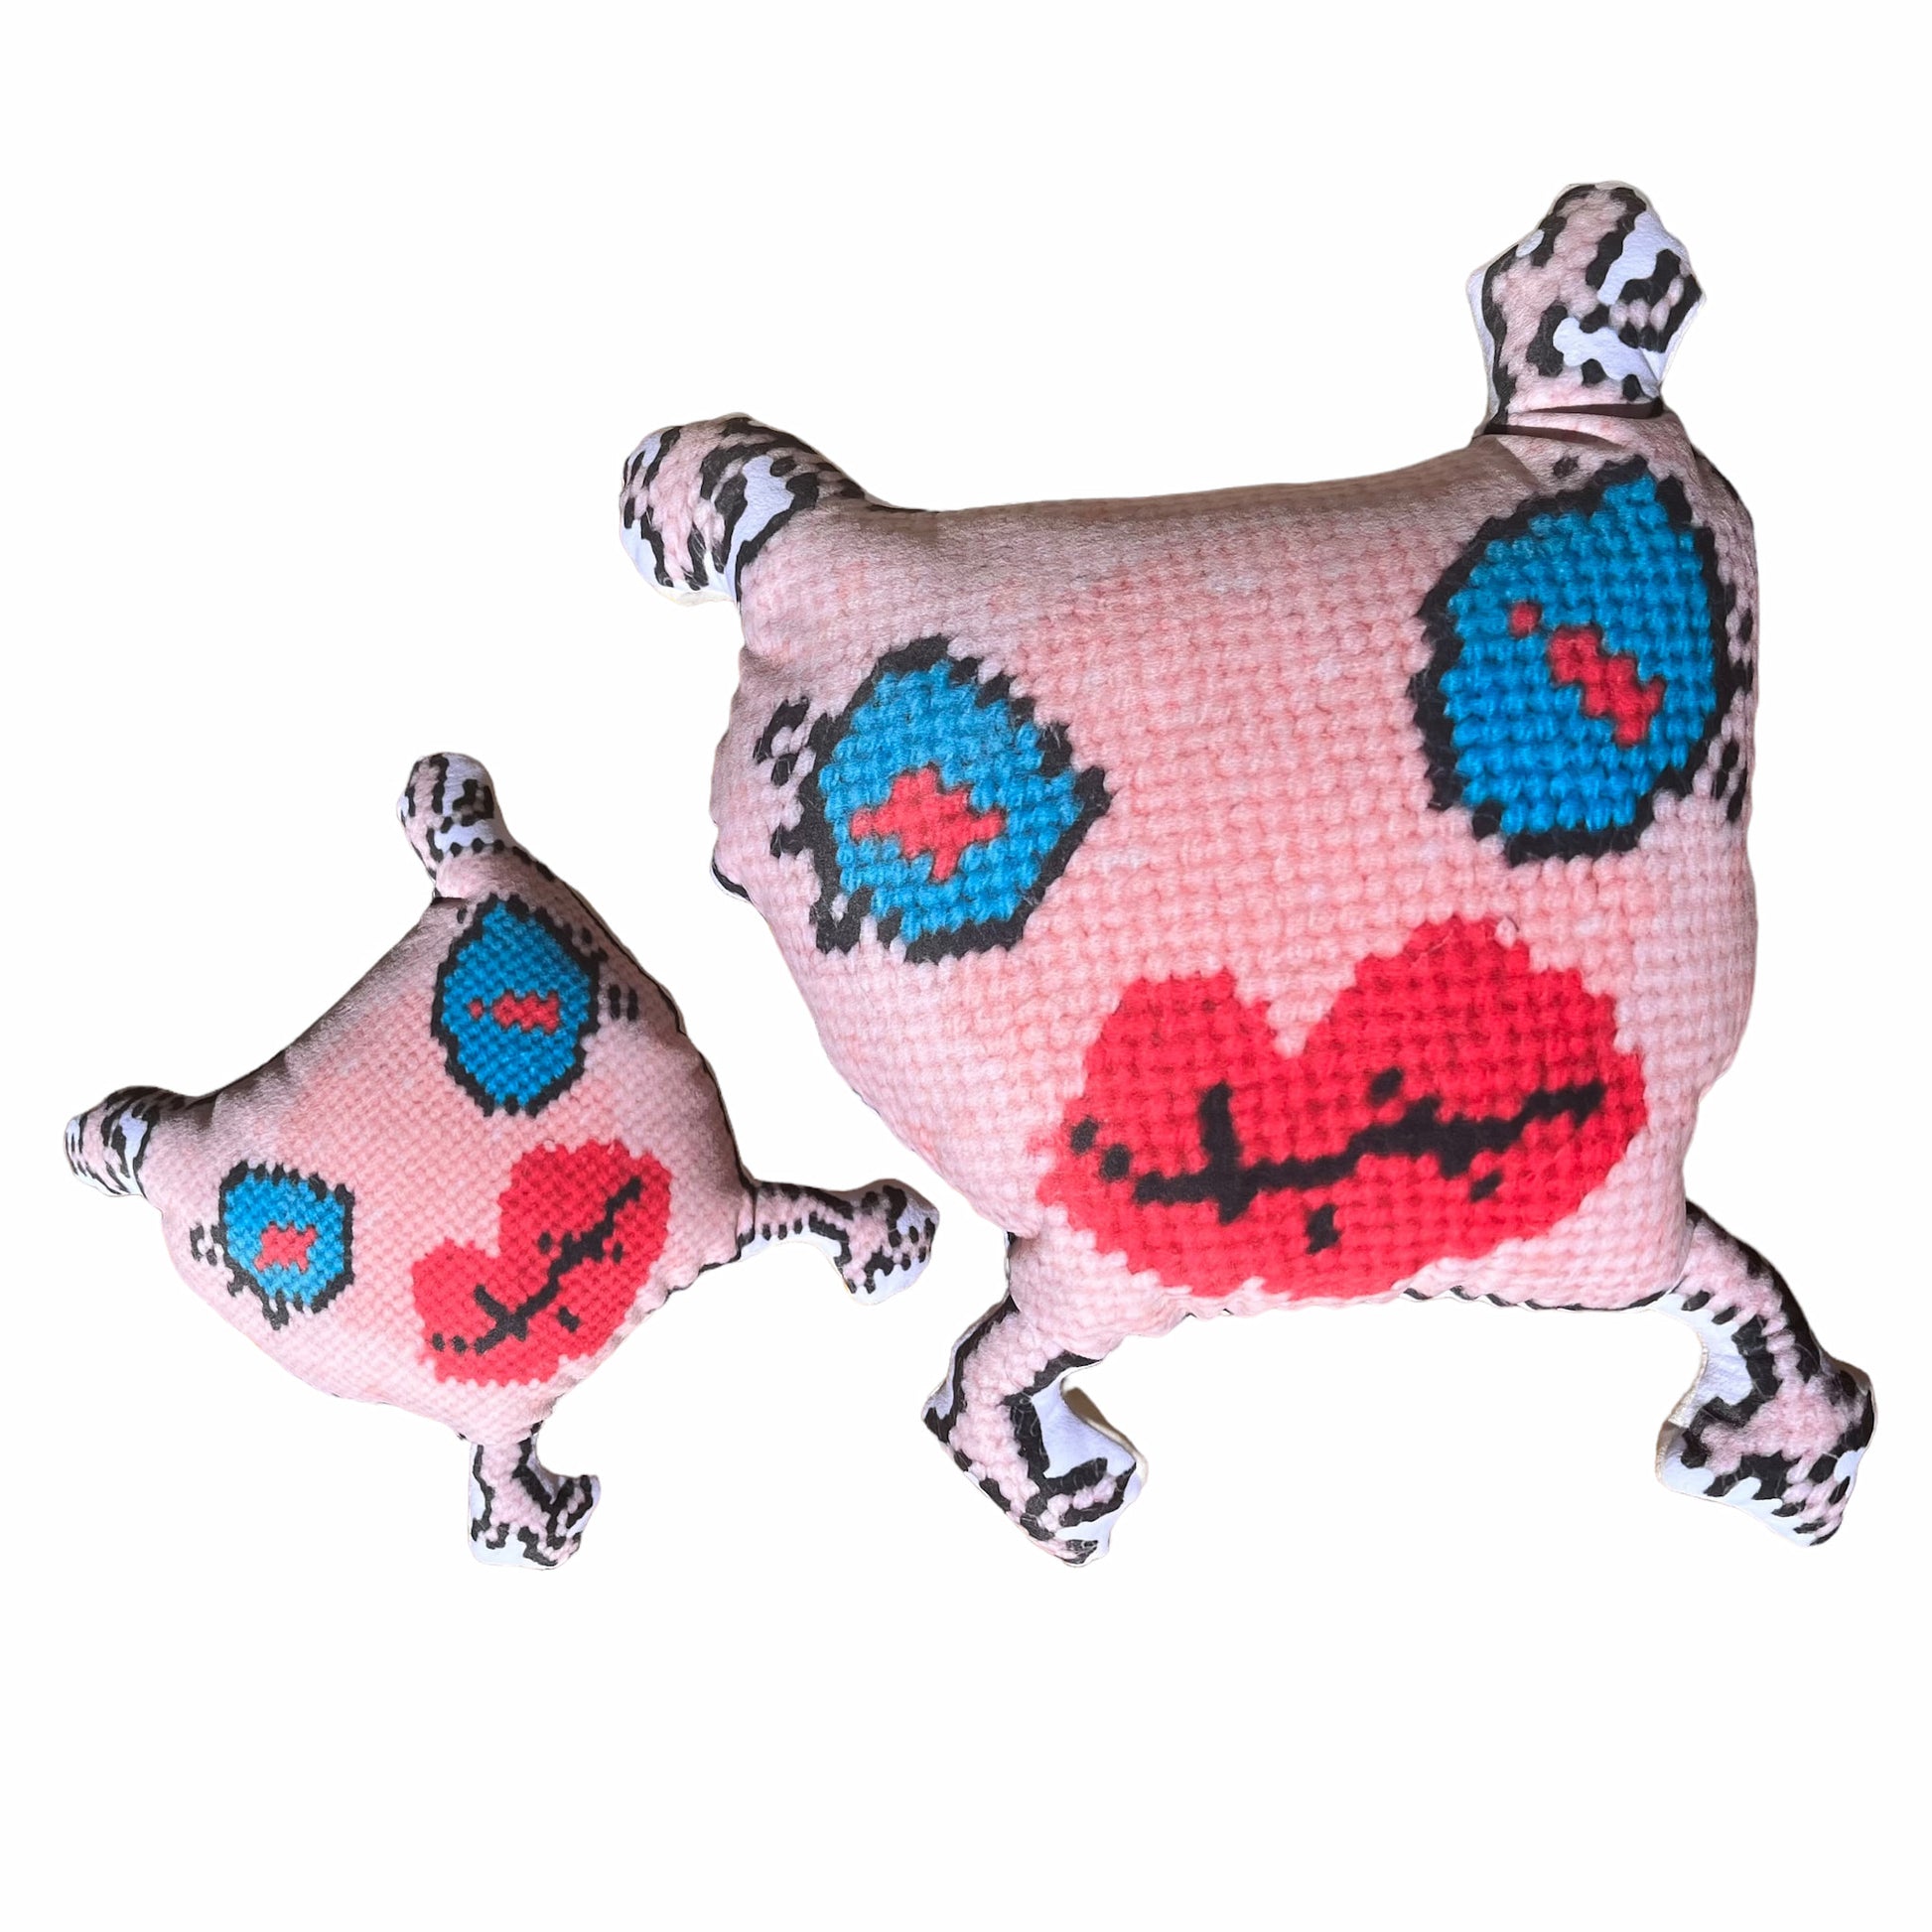 sweet monster sculpted plush pillow with big blue eyes and lips